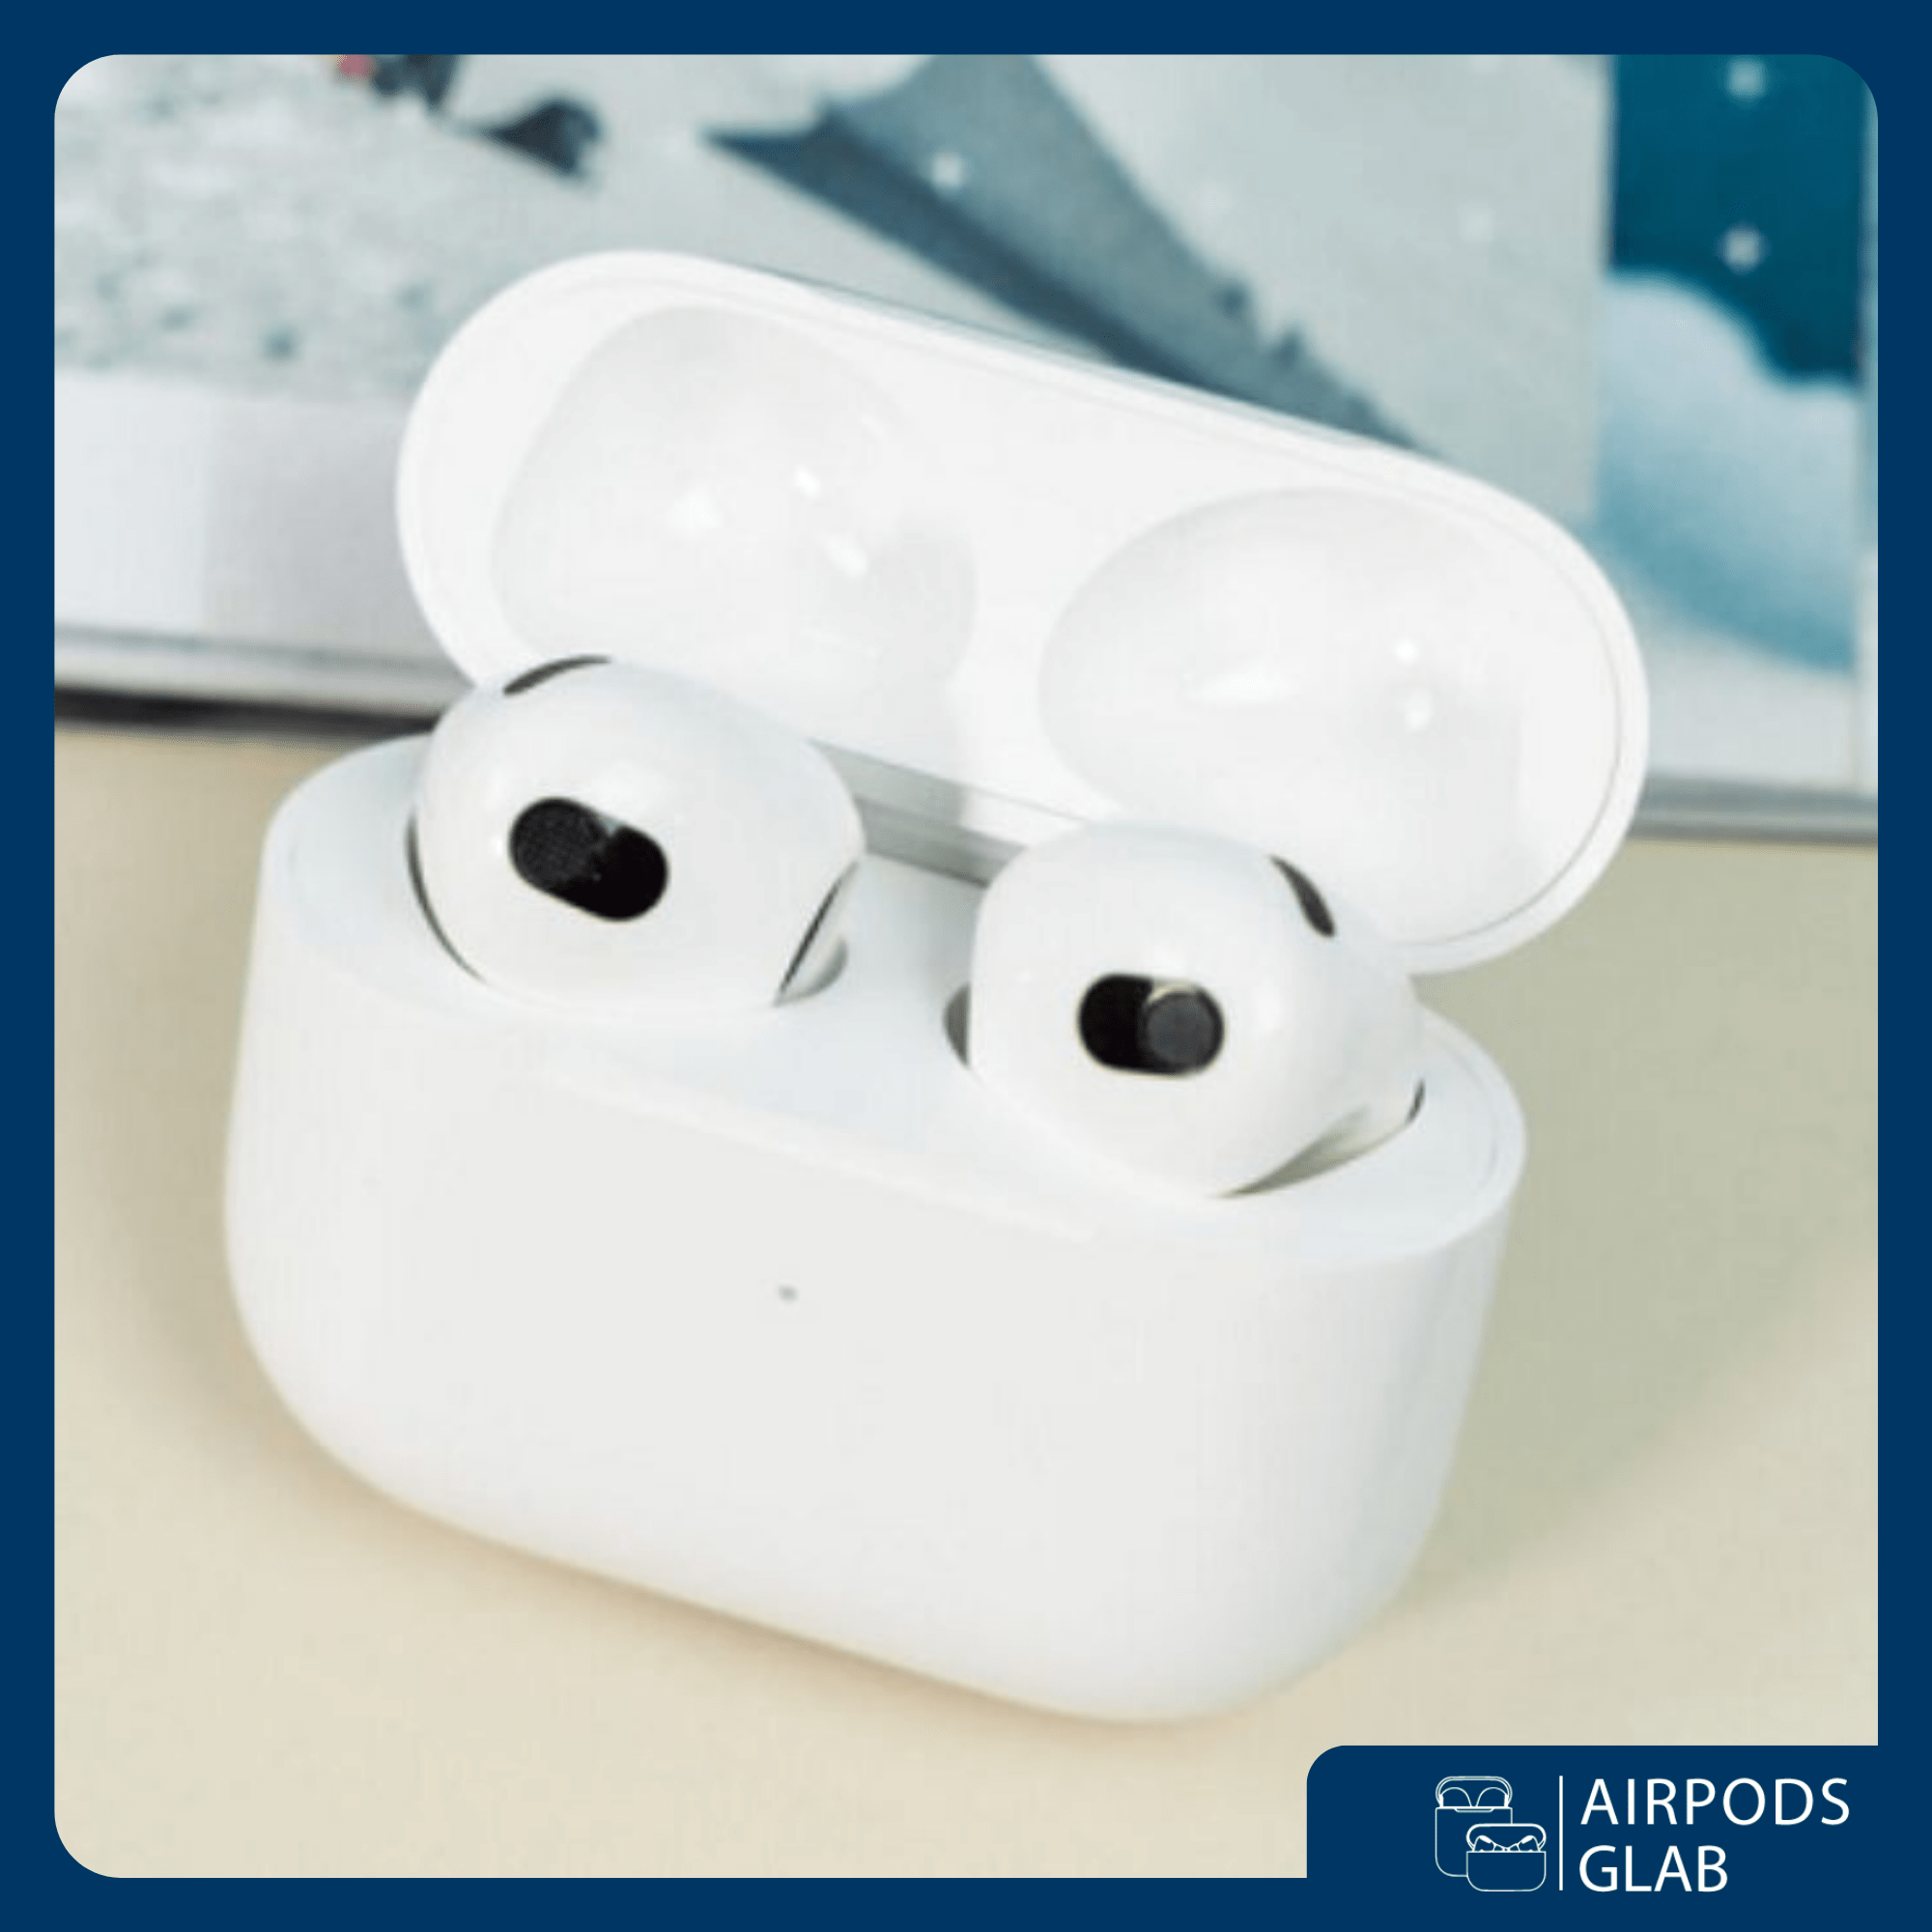 su-dung-airpods-3